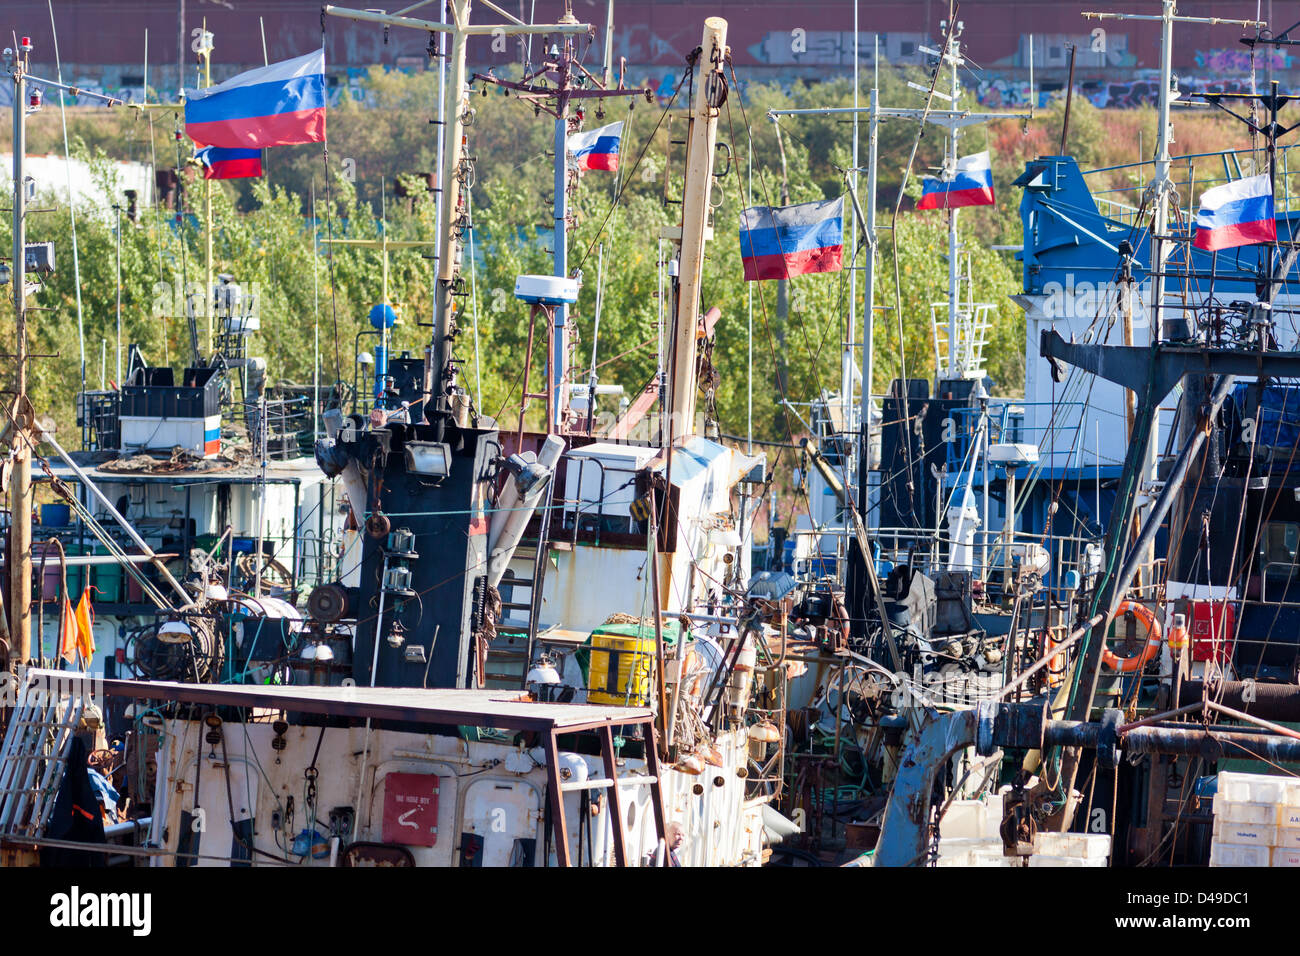 Masts with Russian flags in the Russian port of Murmansk Stock Photo